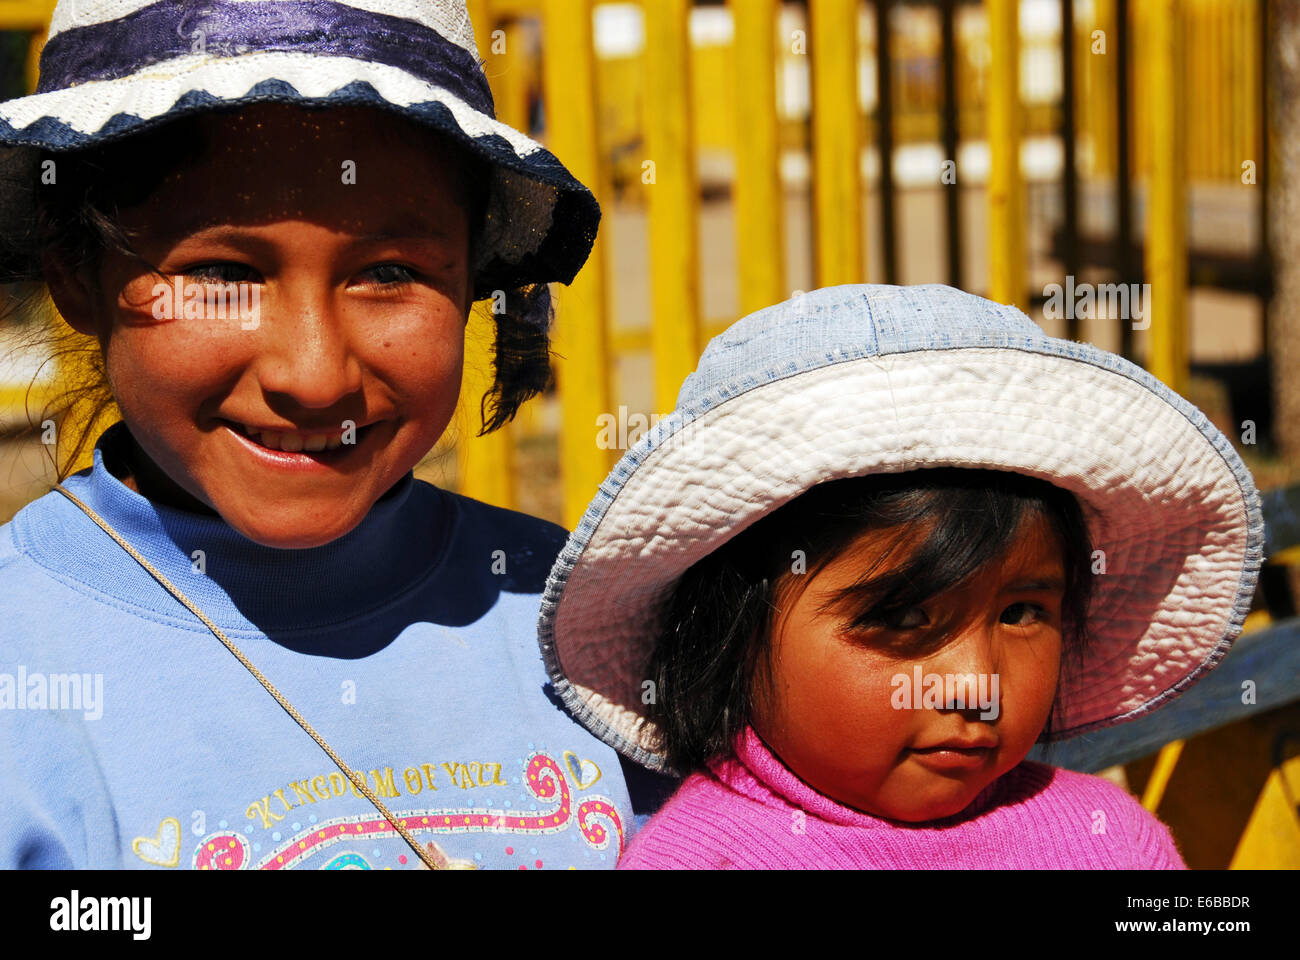 Bolivia, El alto, portrait of two cute smiling girls wearing hats. Stock Photo